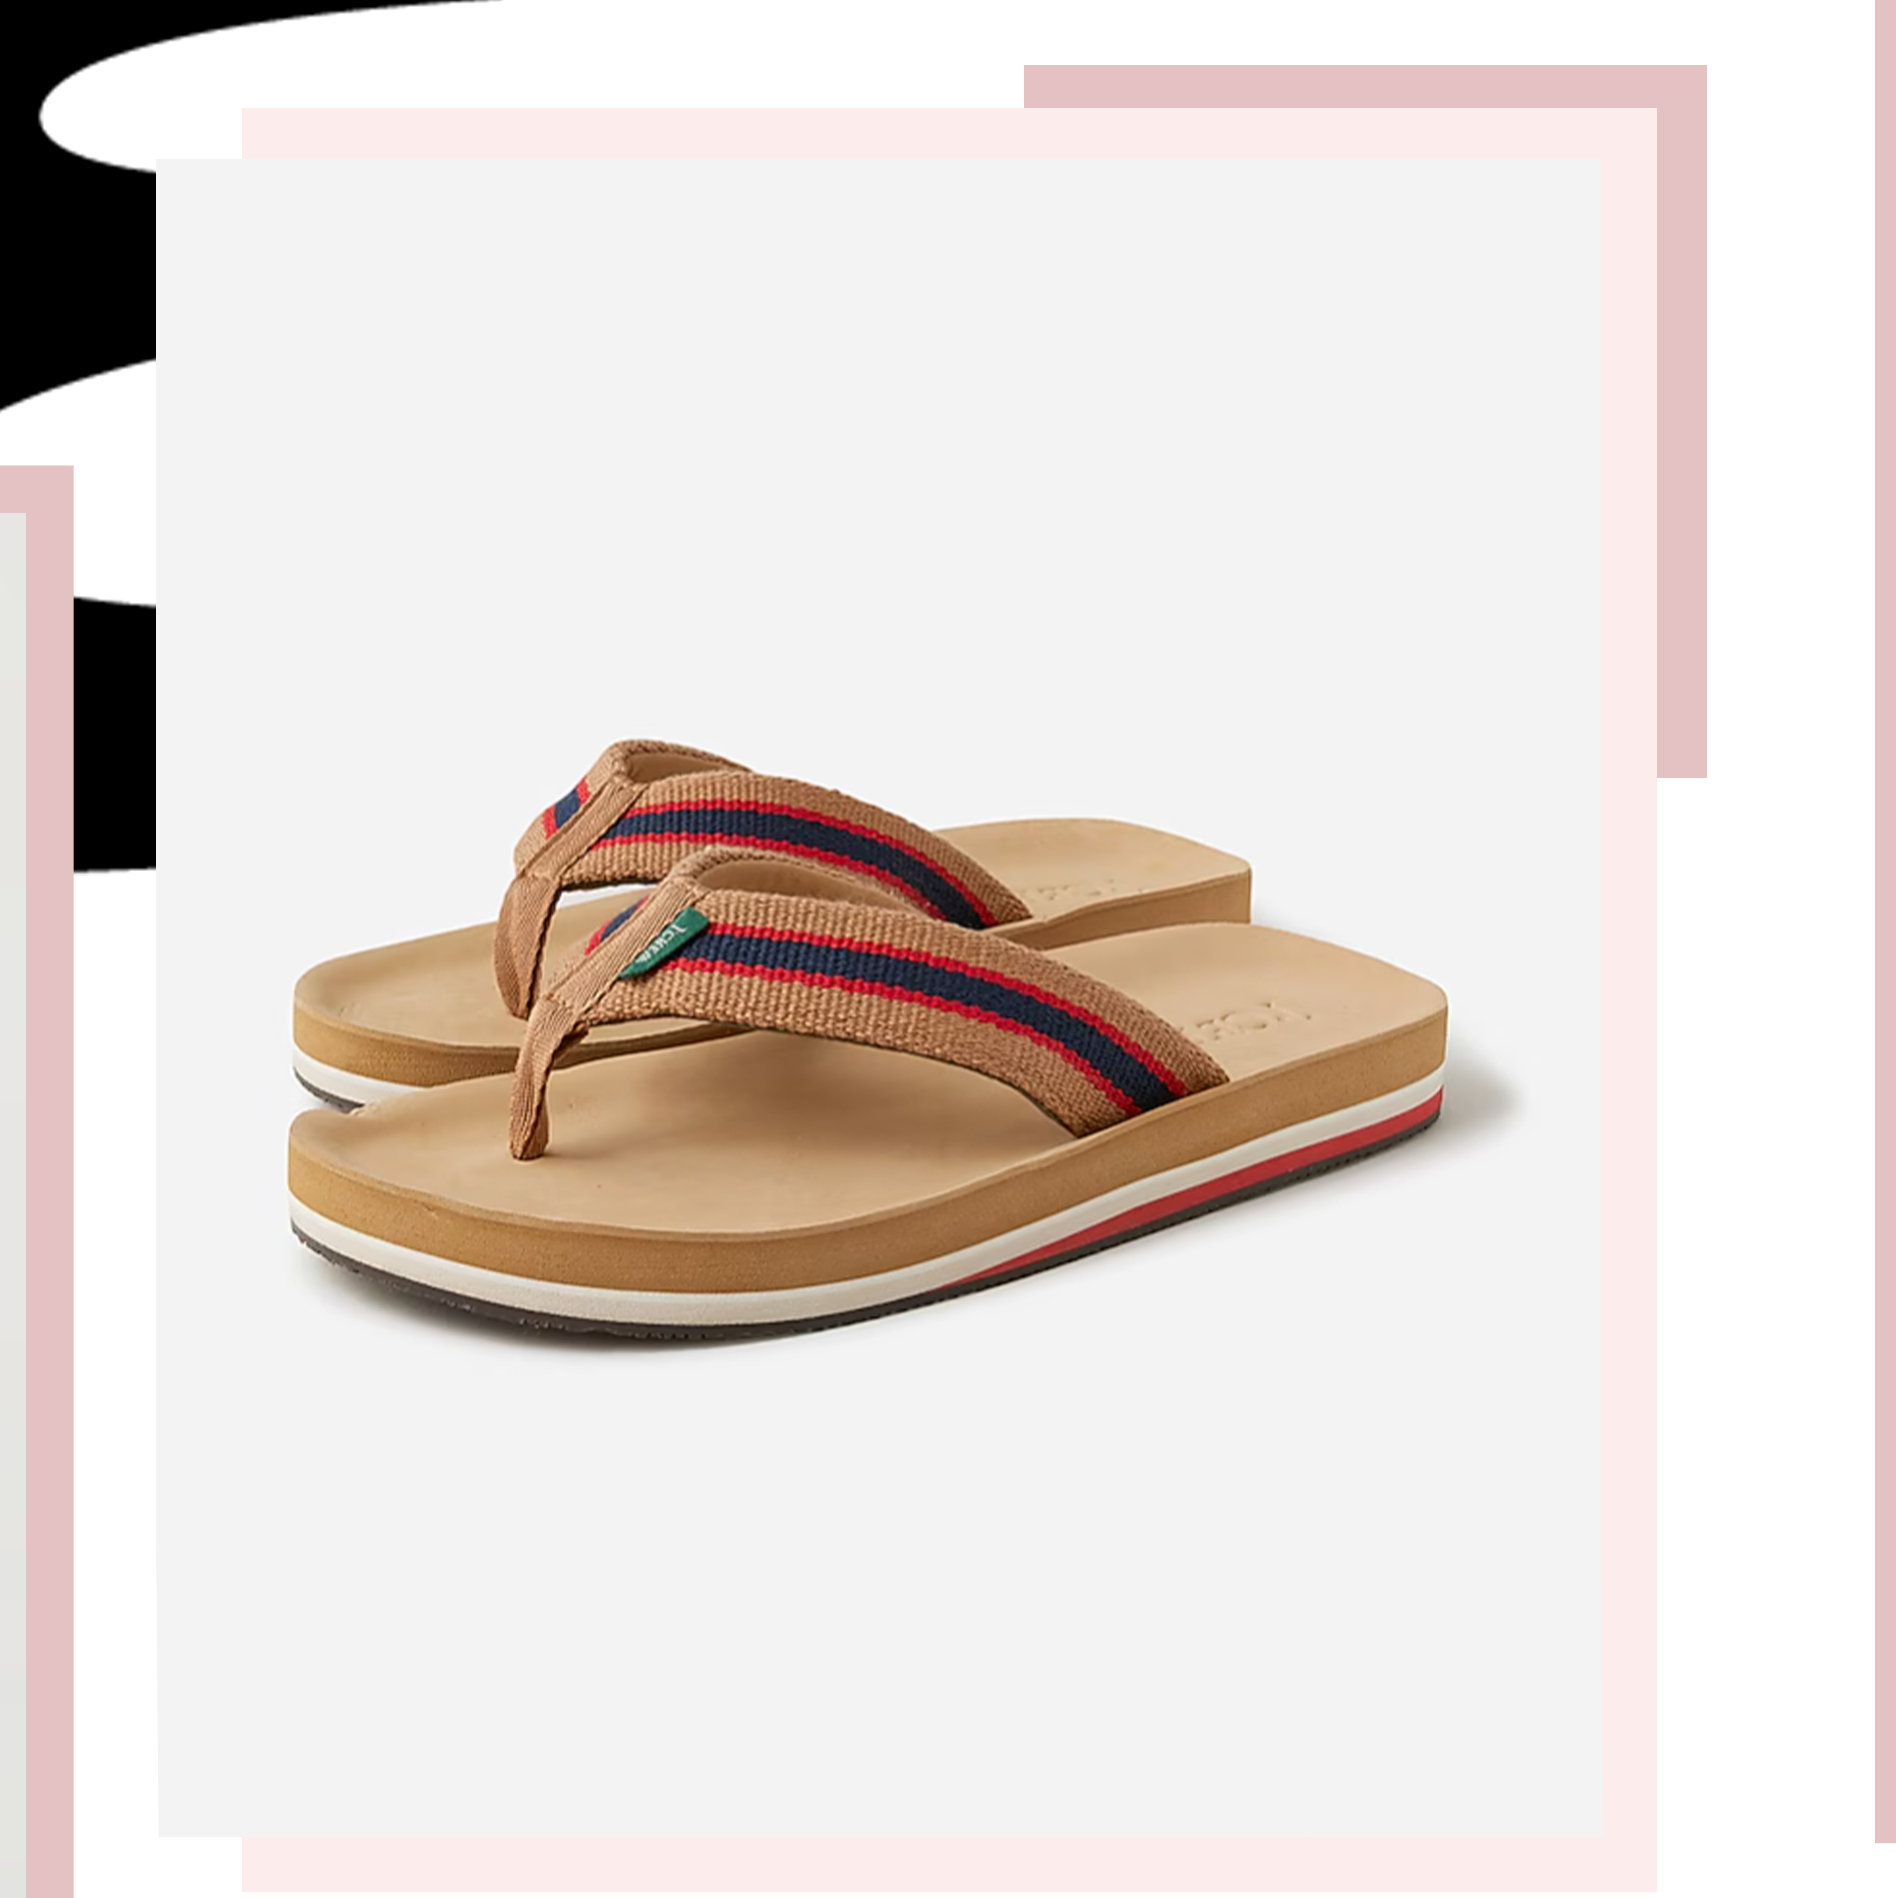 12 Flip-Flops You'll Want to Buy This Summer, Even If You Swore You'd Never Buy Flip-Flops